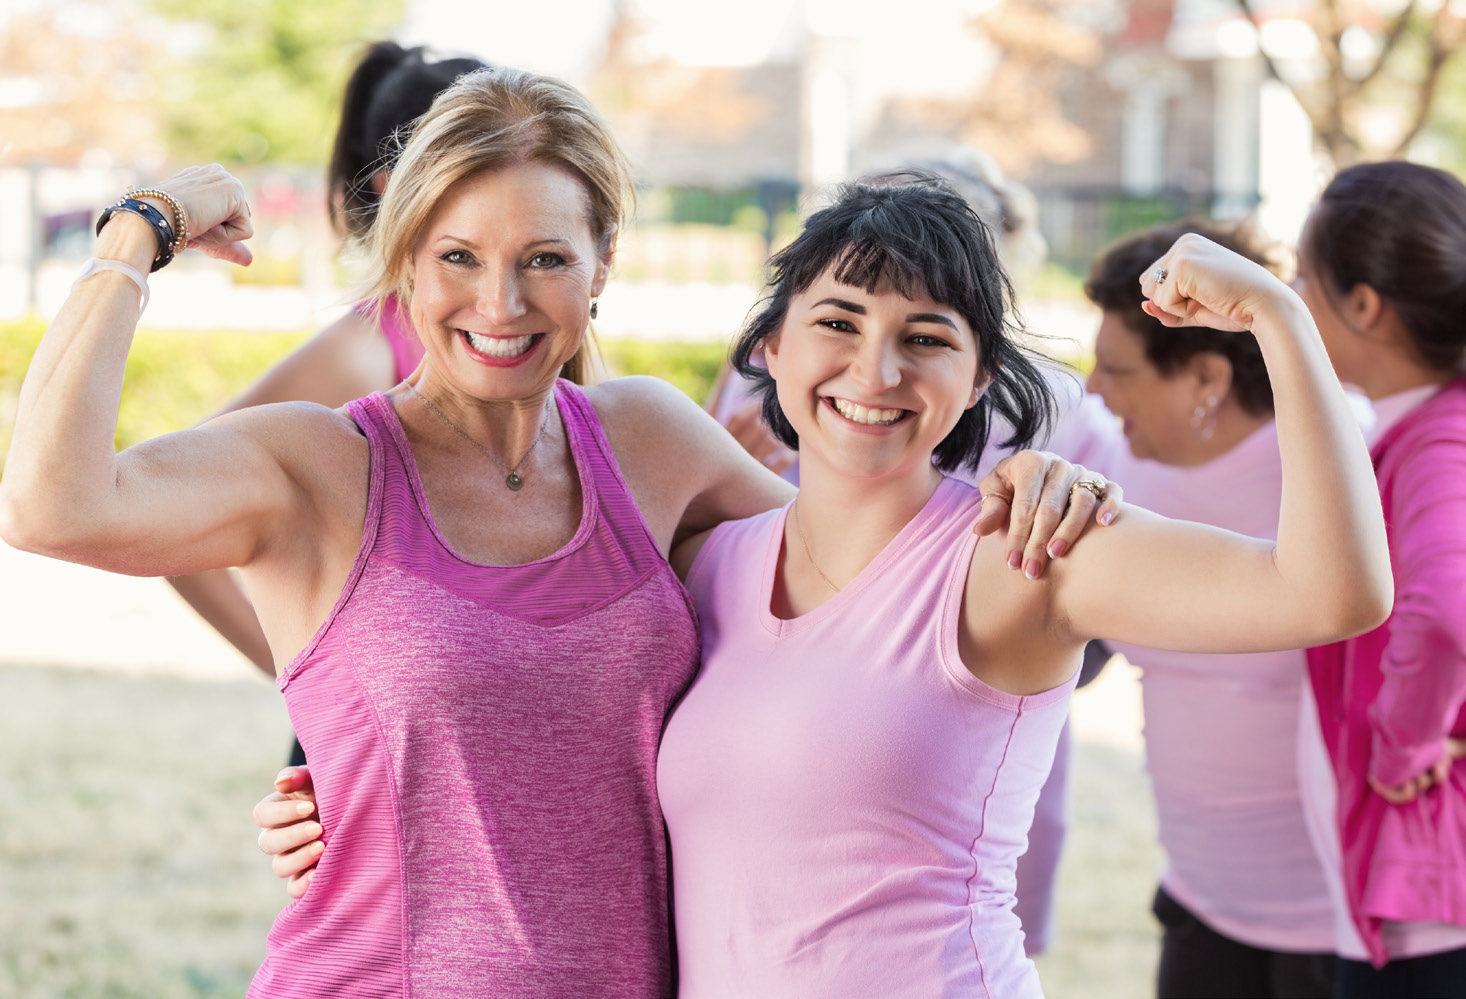 Two women in pink workout attire, showing their muscles.